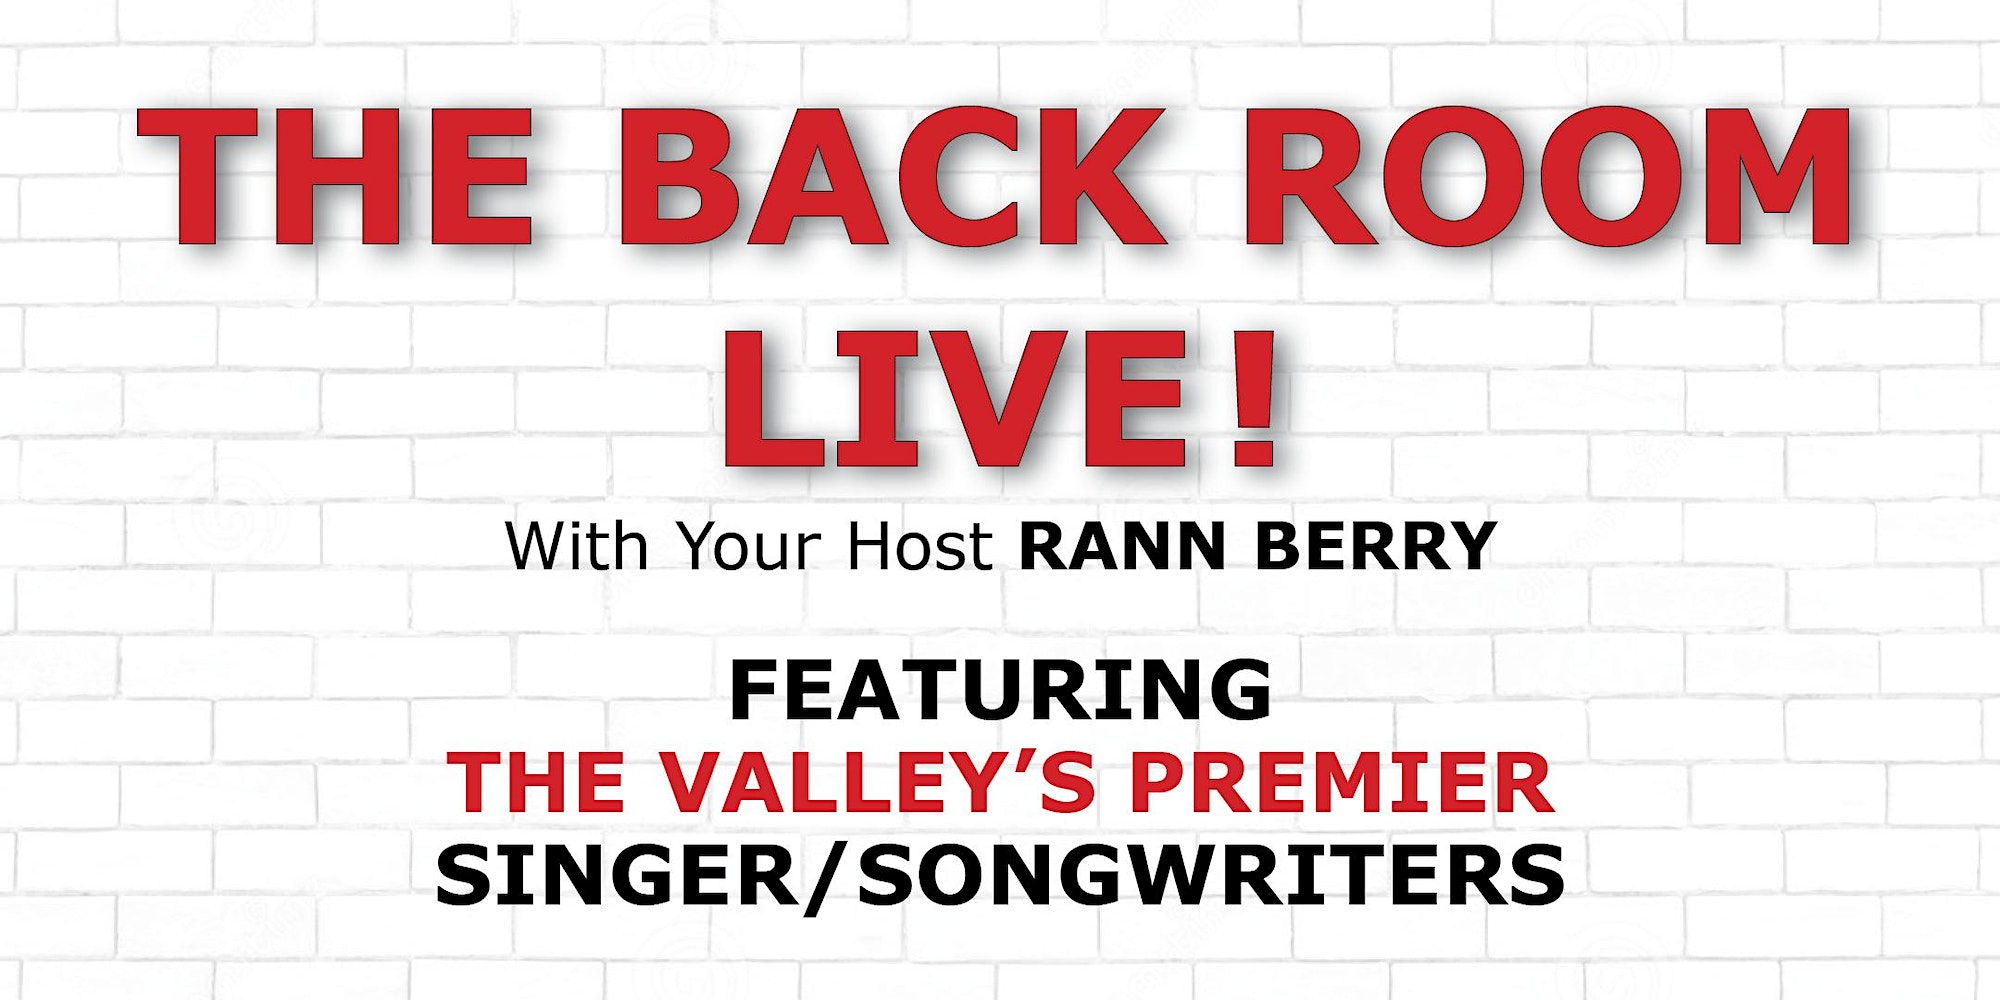 "THE BACK ROOM LIVE " With Host RANN BERRY Gonzo Events Calendar for